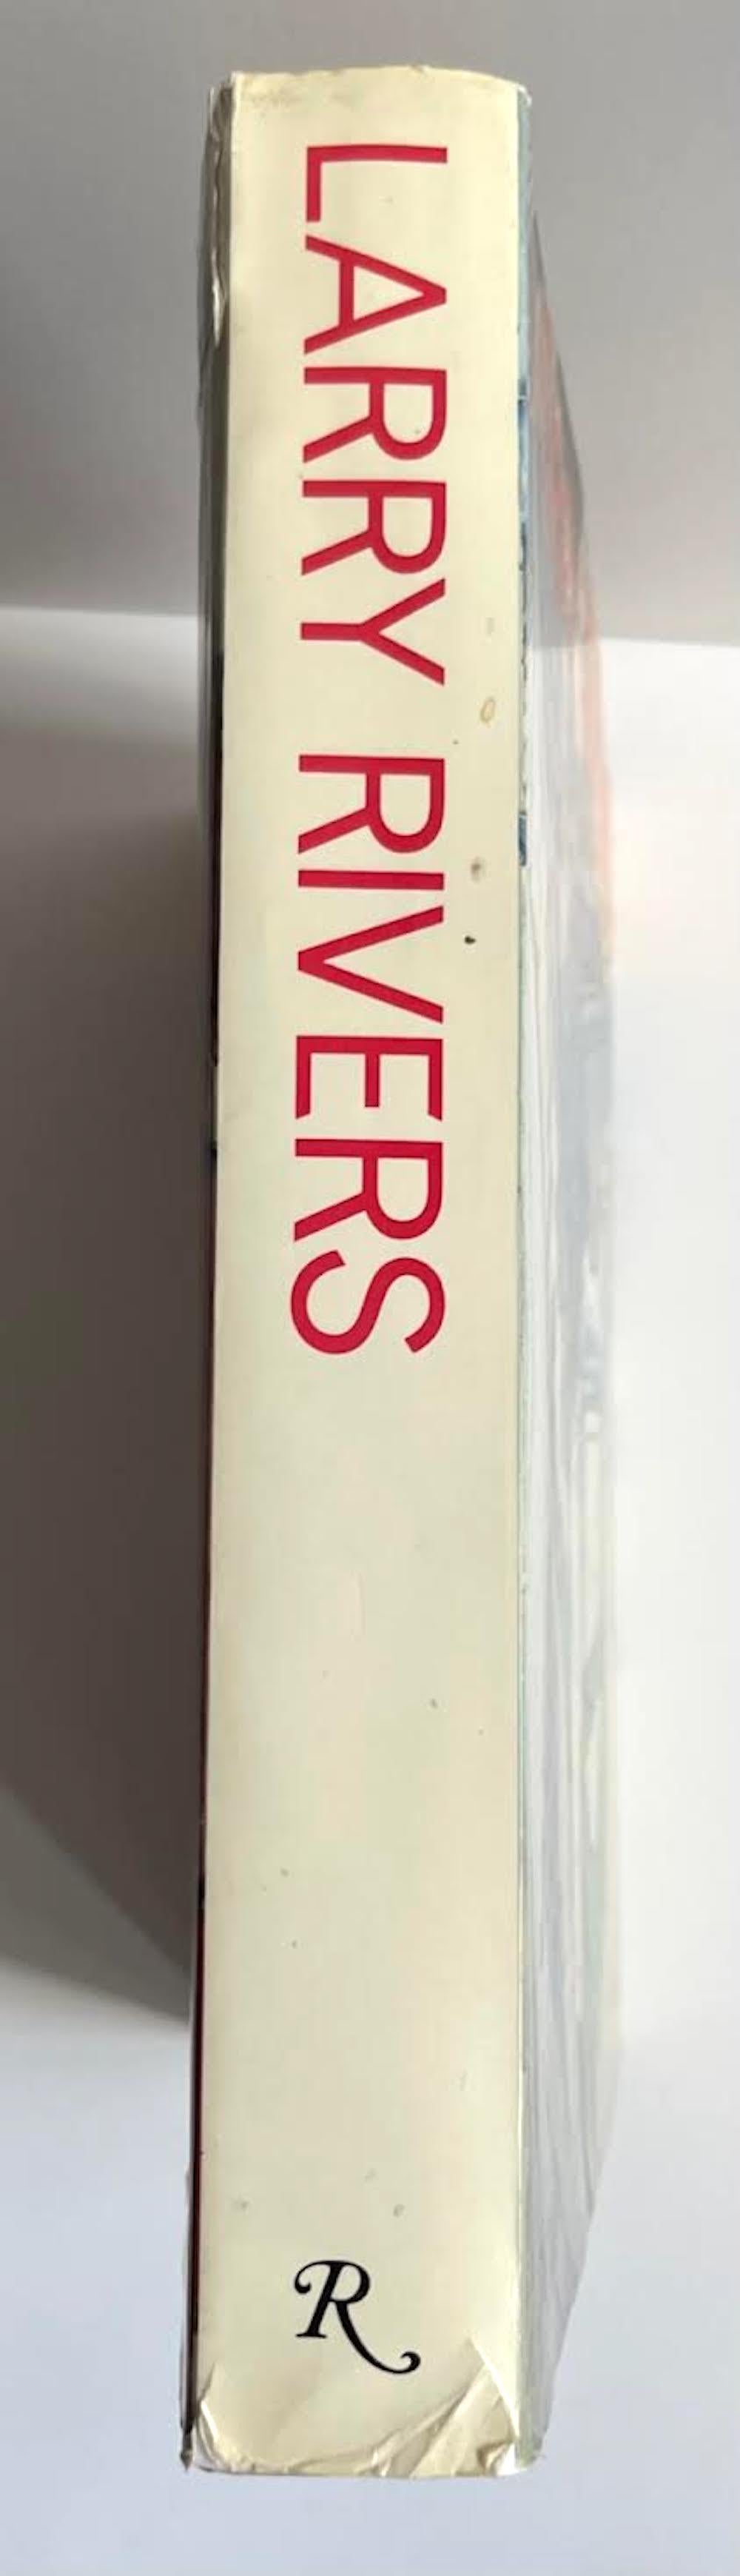 LARRY RIVERS (hand signed and inscribed first edition book)  For Sale 9